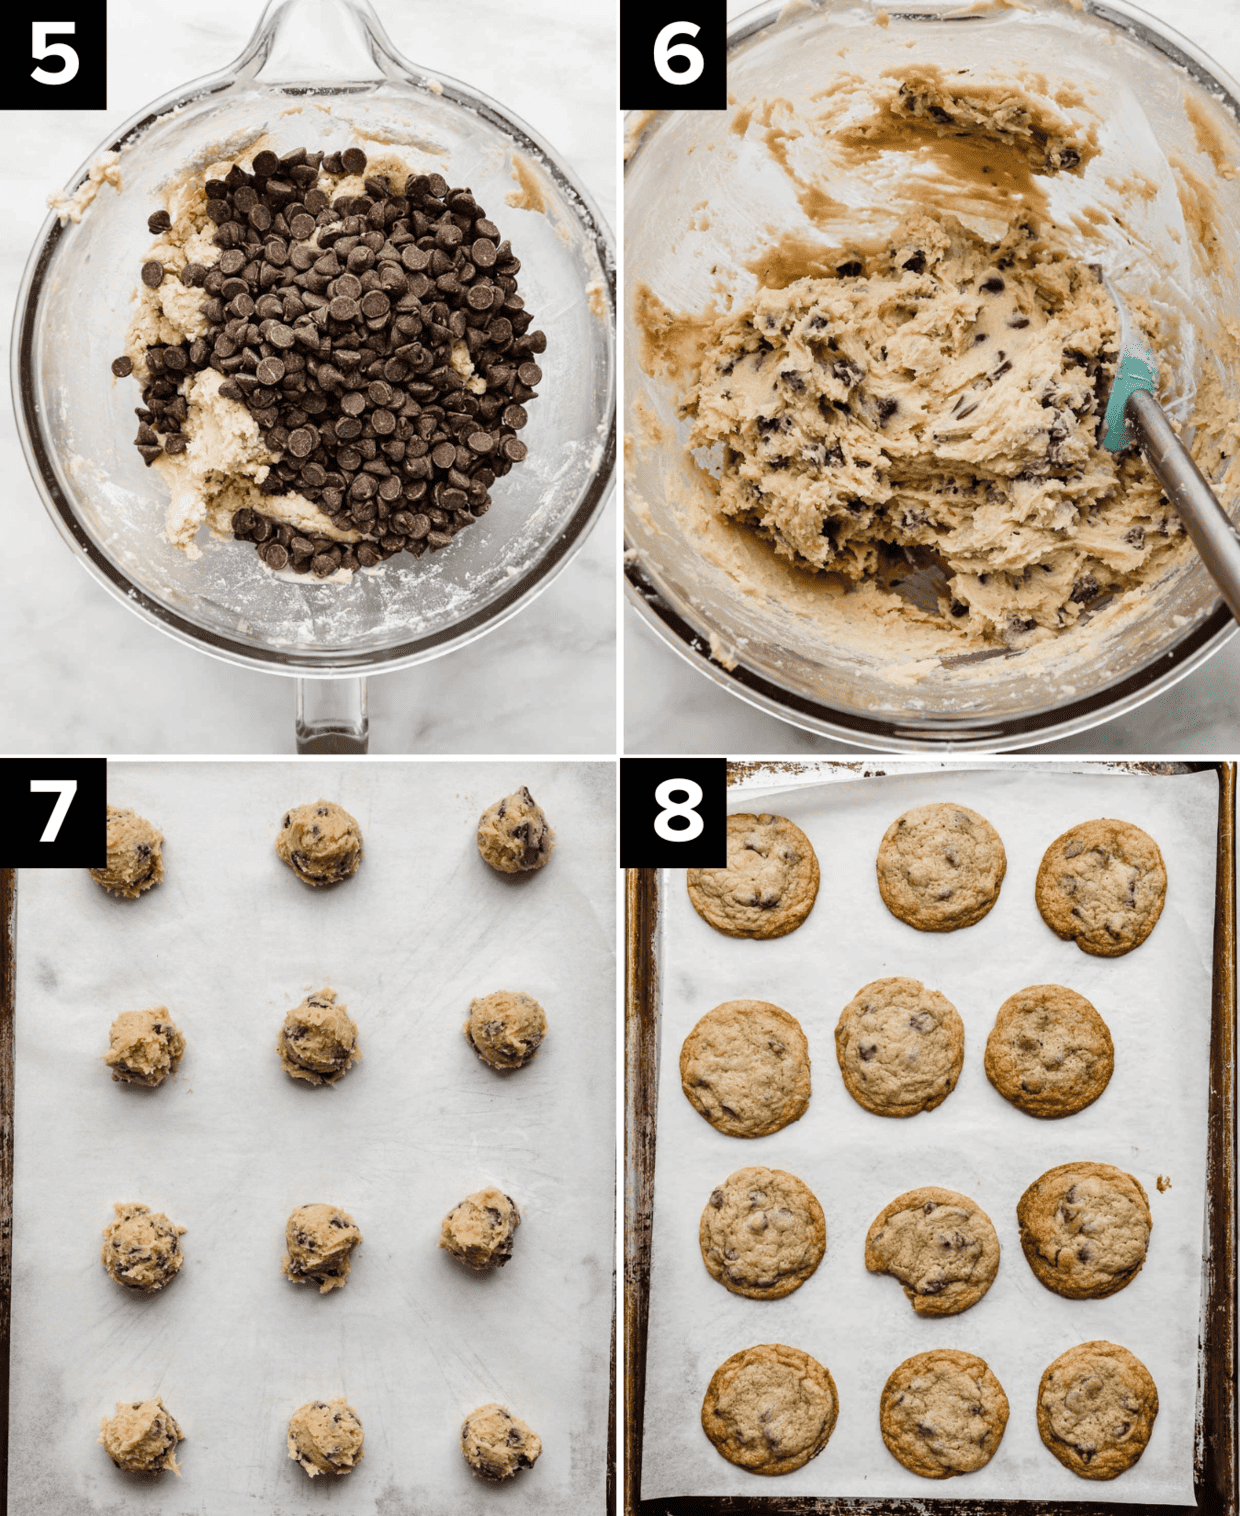 Nestle Toll House Chocolate Chip Cookie dough in a glass bowl, then portioned into balls on a baking sheet, and another photo showing the cookies baked on a baking sheet.